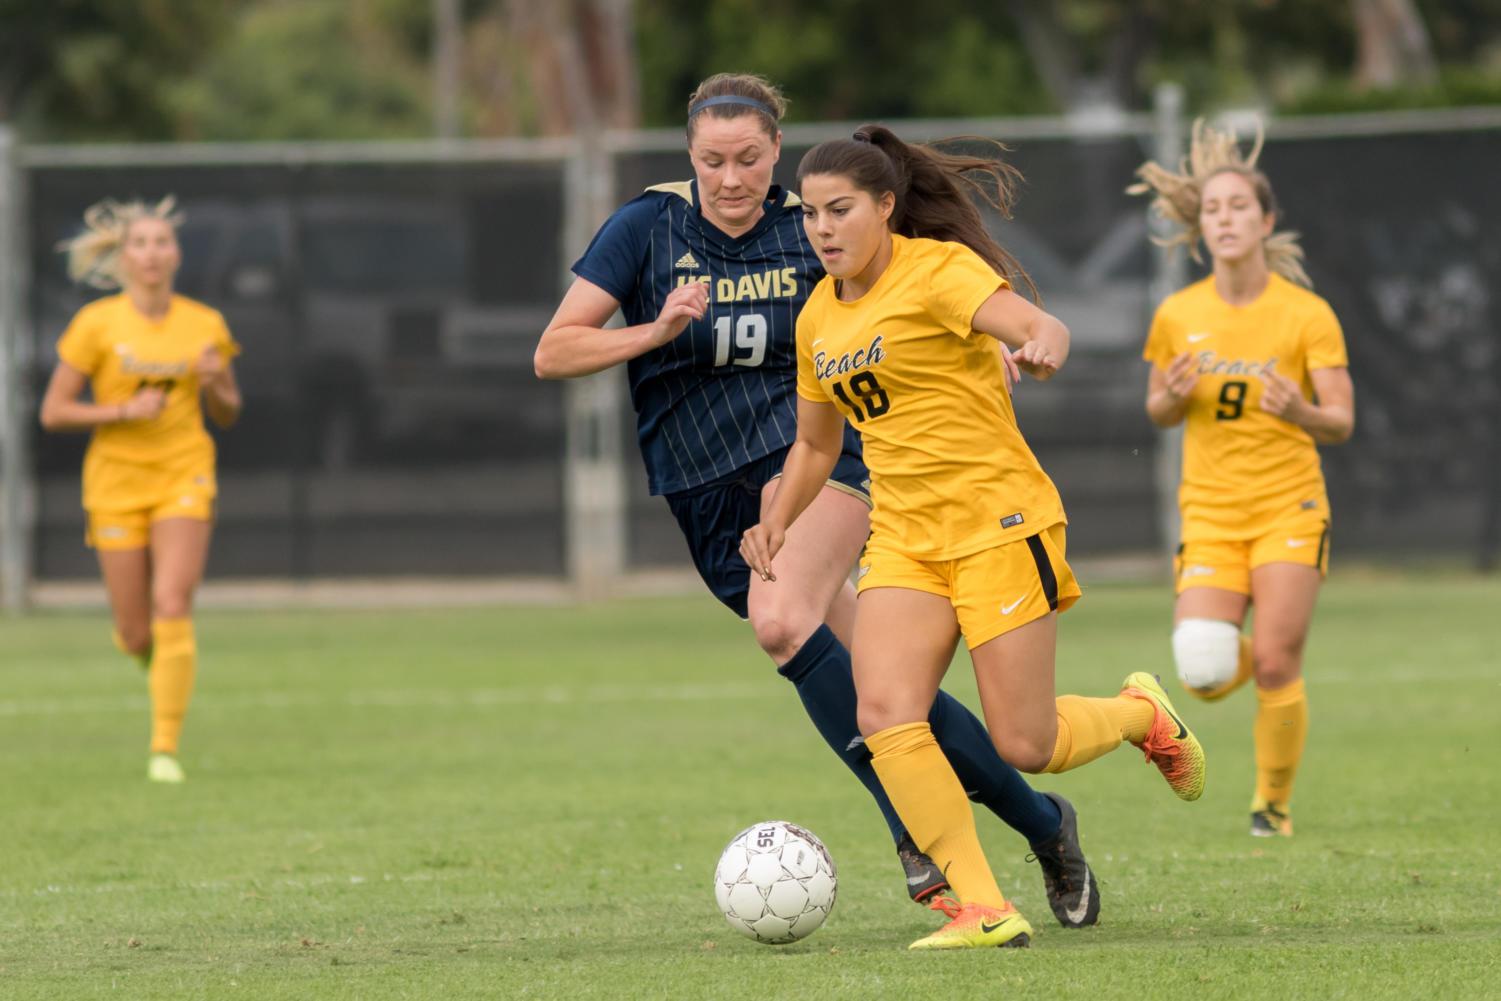 Long Beach State sophomore Katie Pingel dribbles the ball in Sunday's season finale match against UC Davis at George Allen Field.